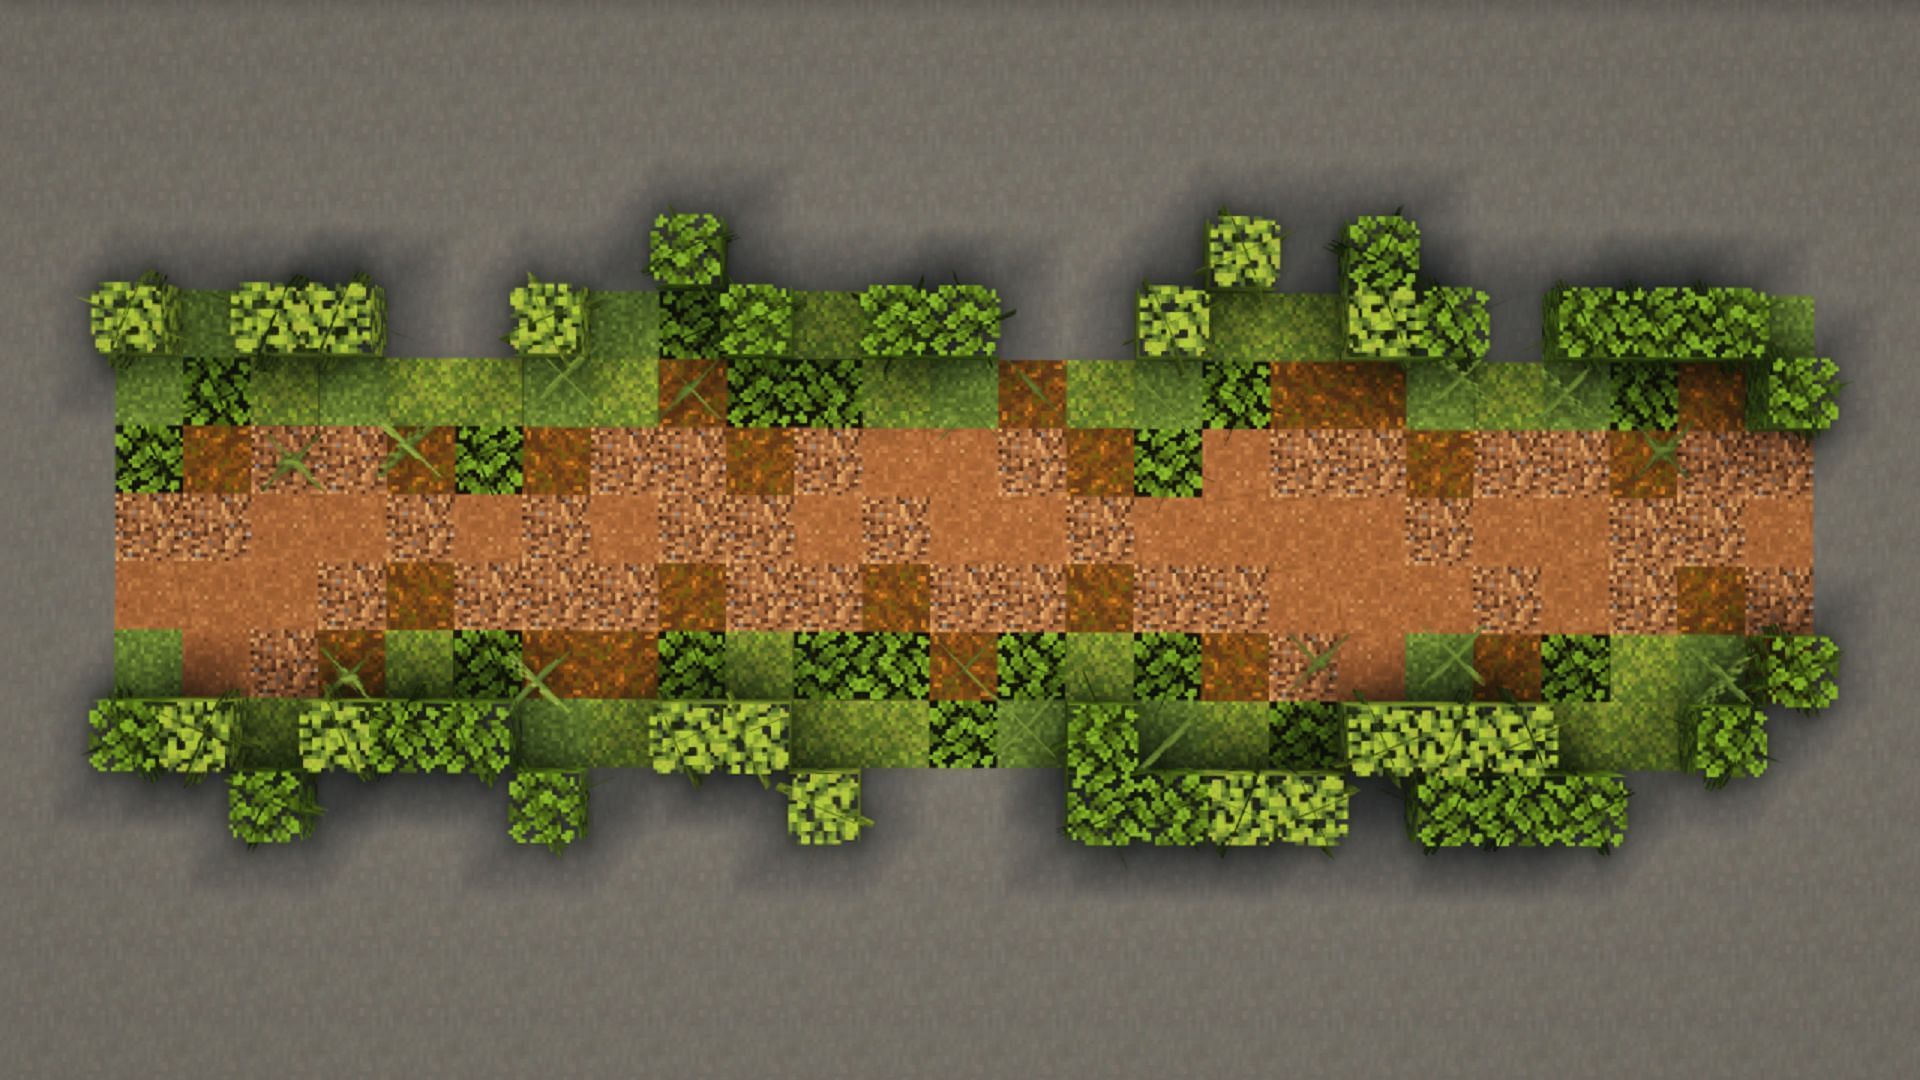 This dirt path design fits in nicely in forests or lush caves (Image via mineblr/Tumblr)